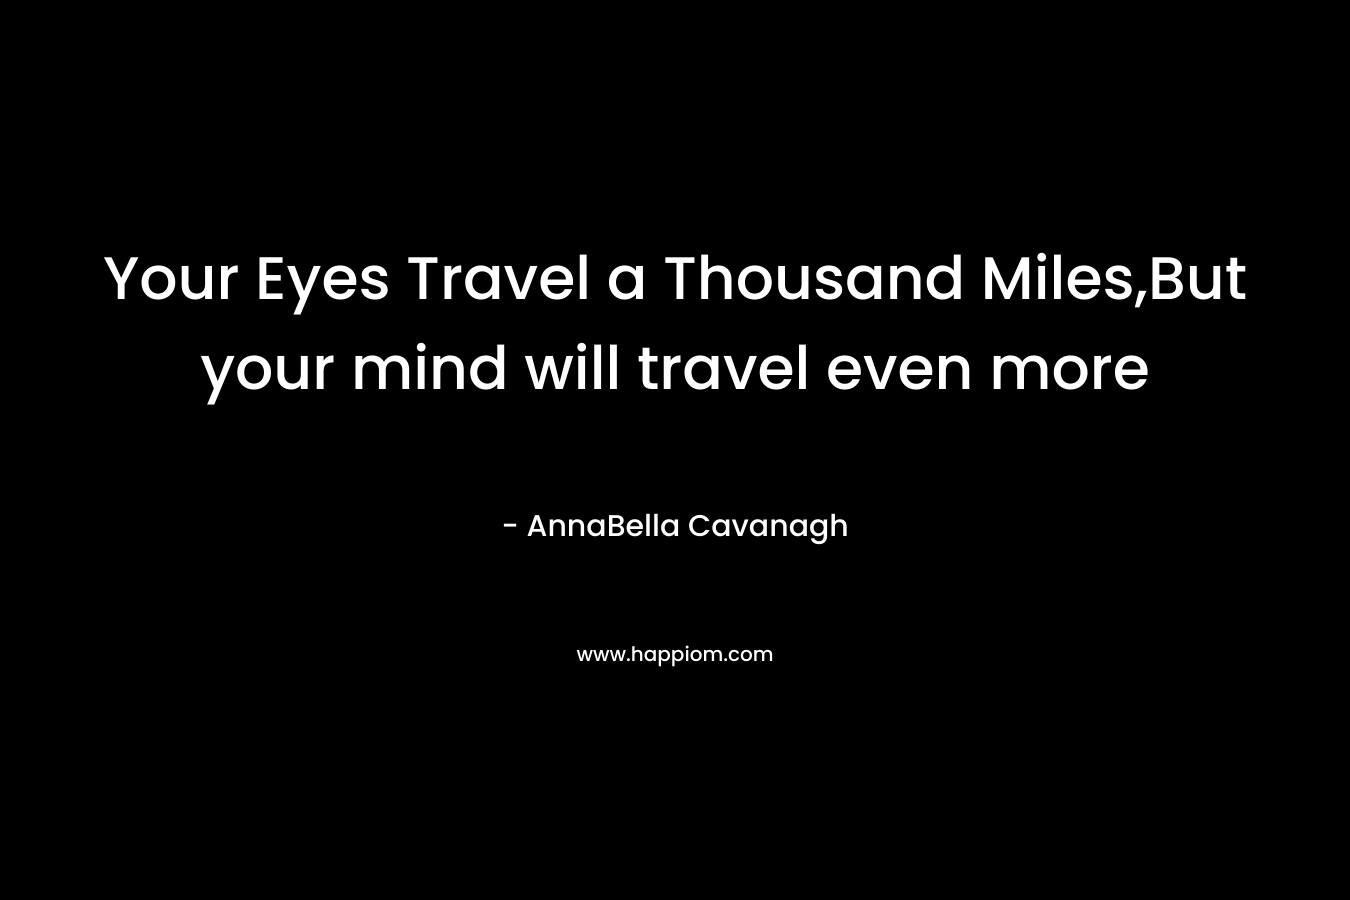 Your Eyes Travel a Thousand Miles,But your mind will travel even more